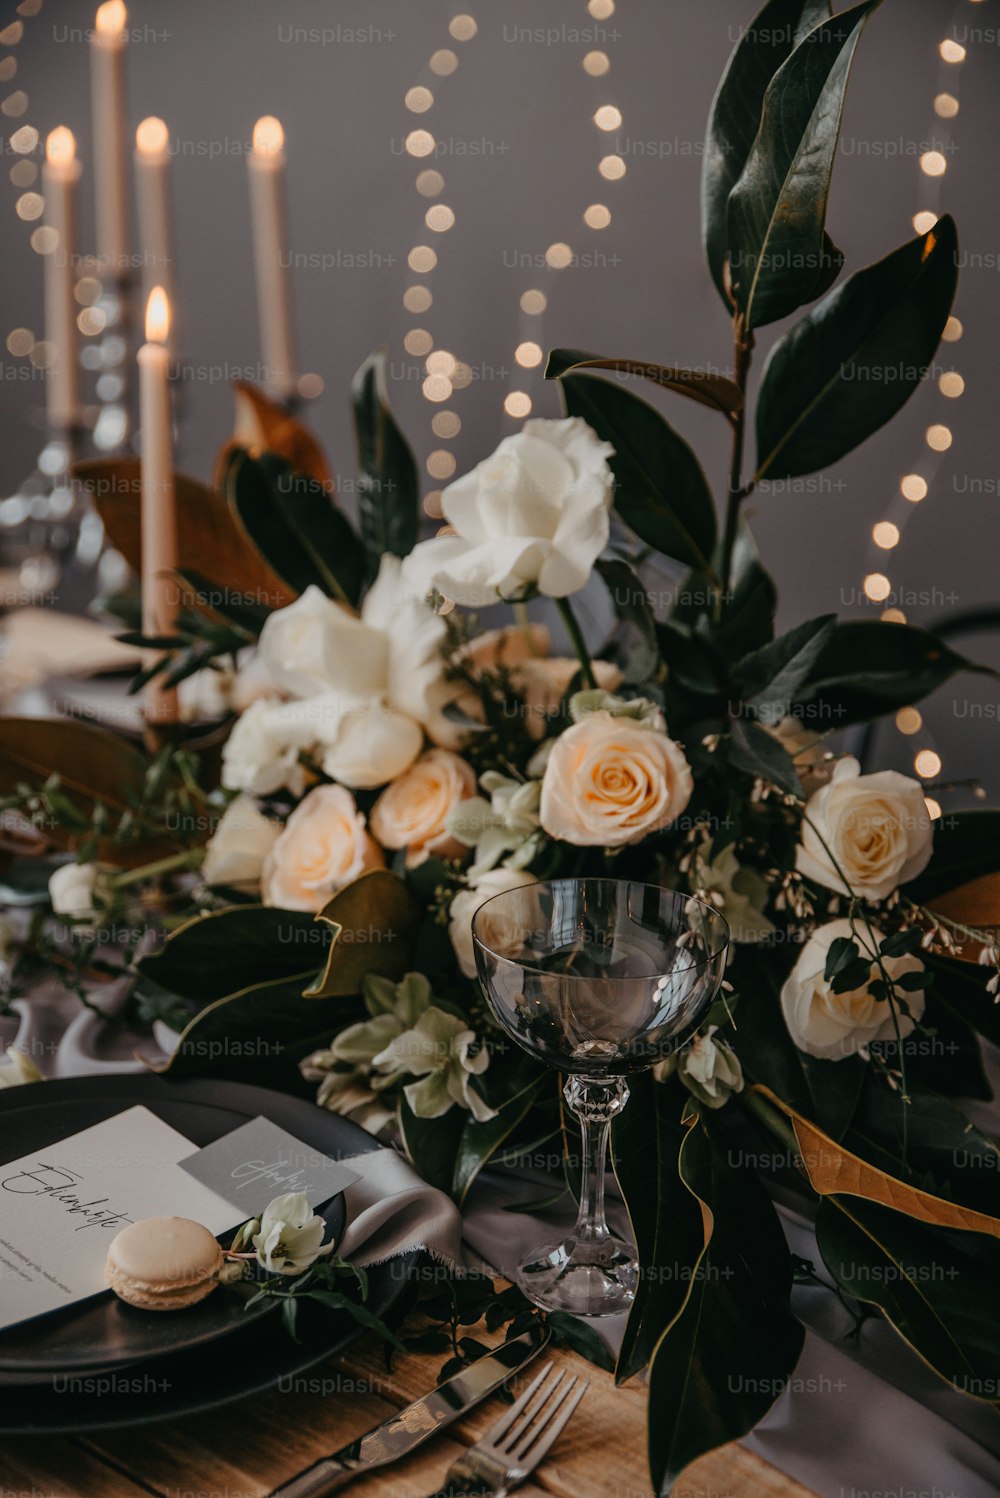 a table set for a formal dinner with candles and flowers